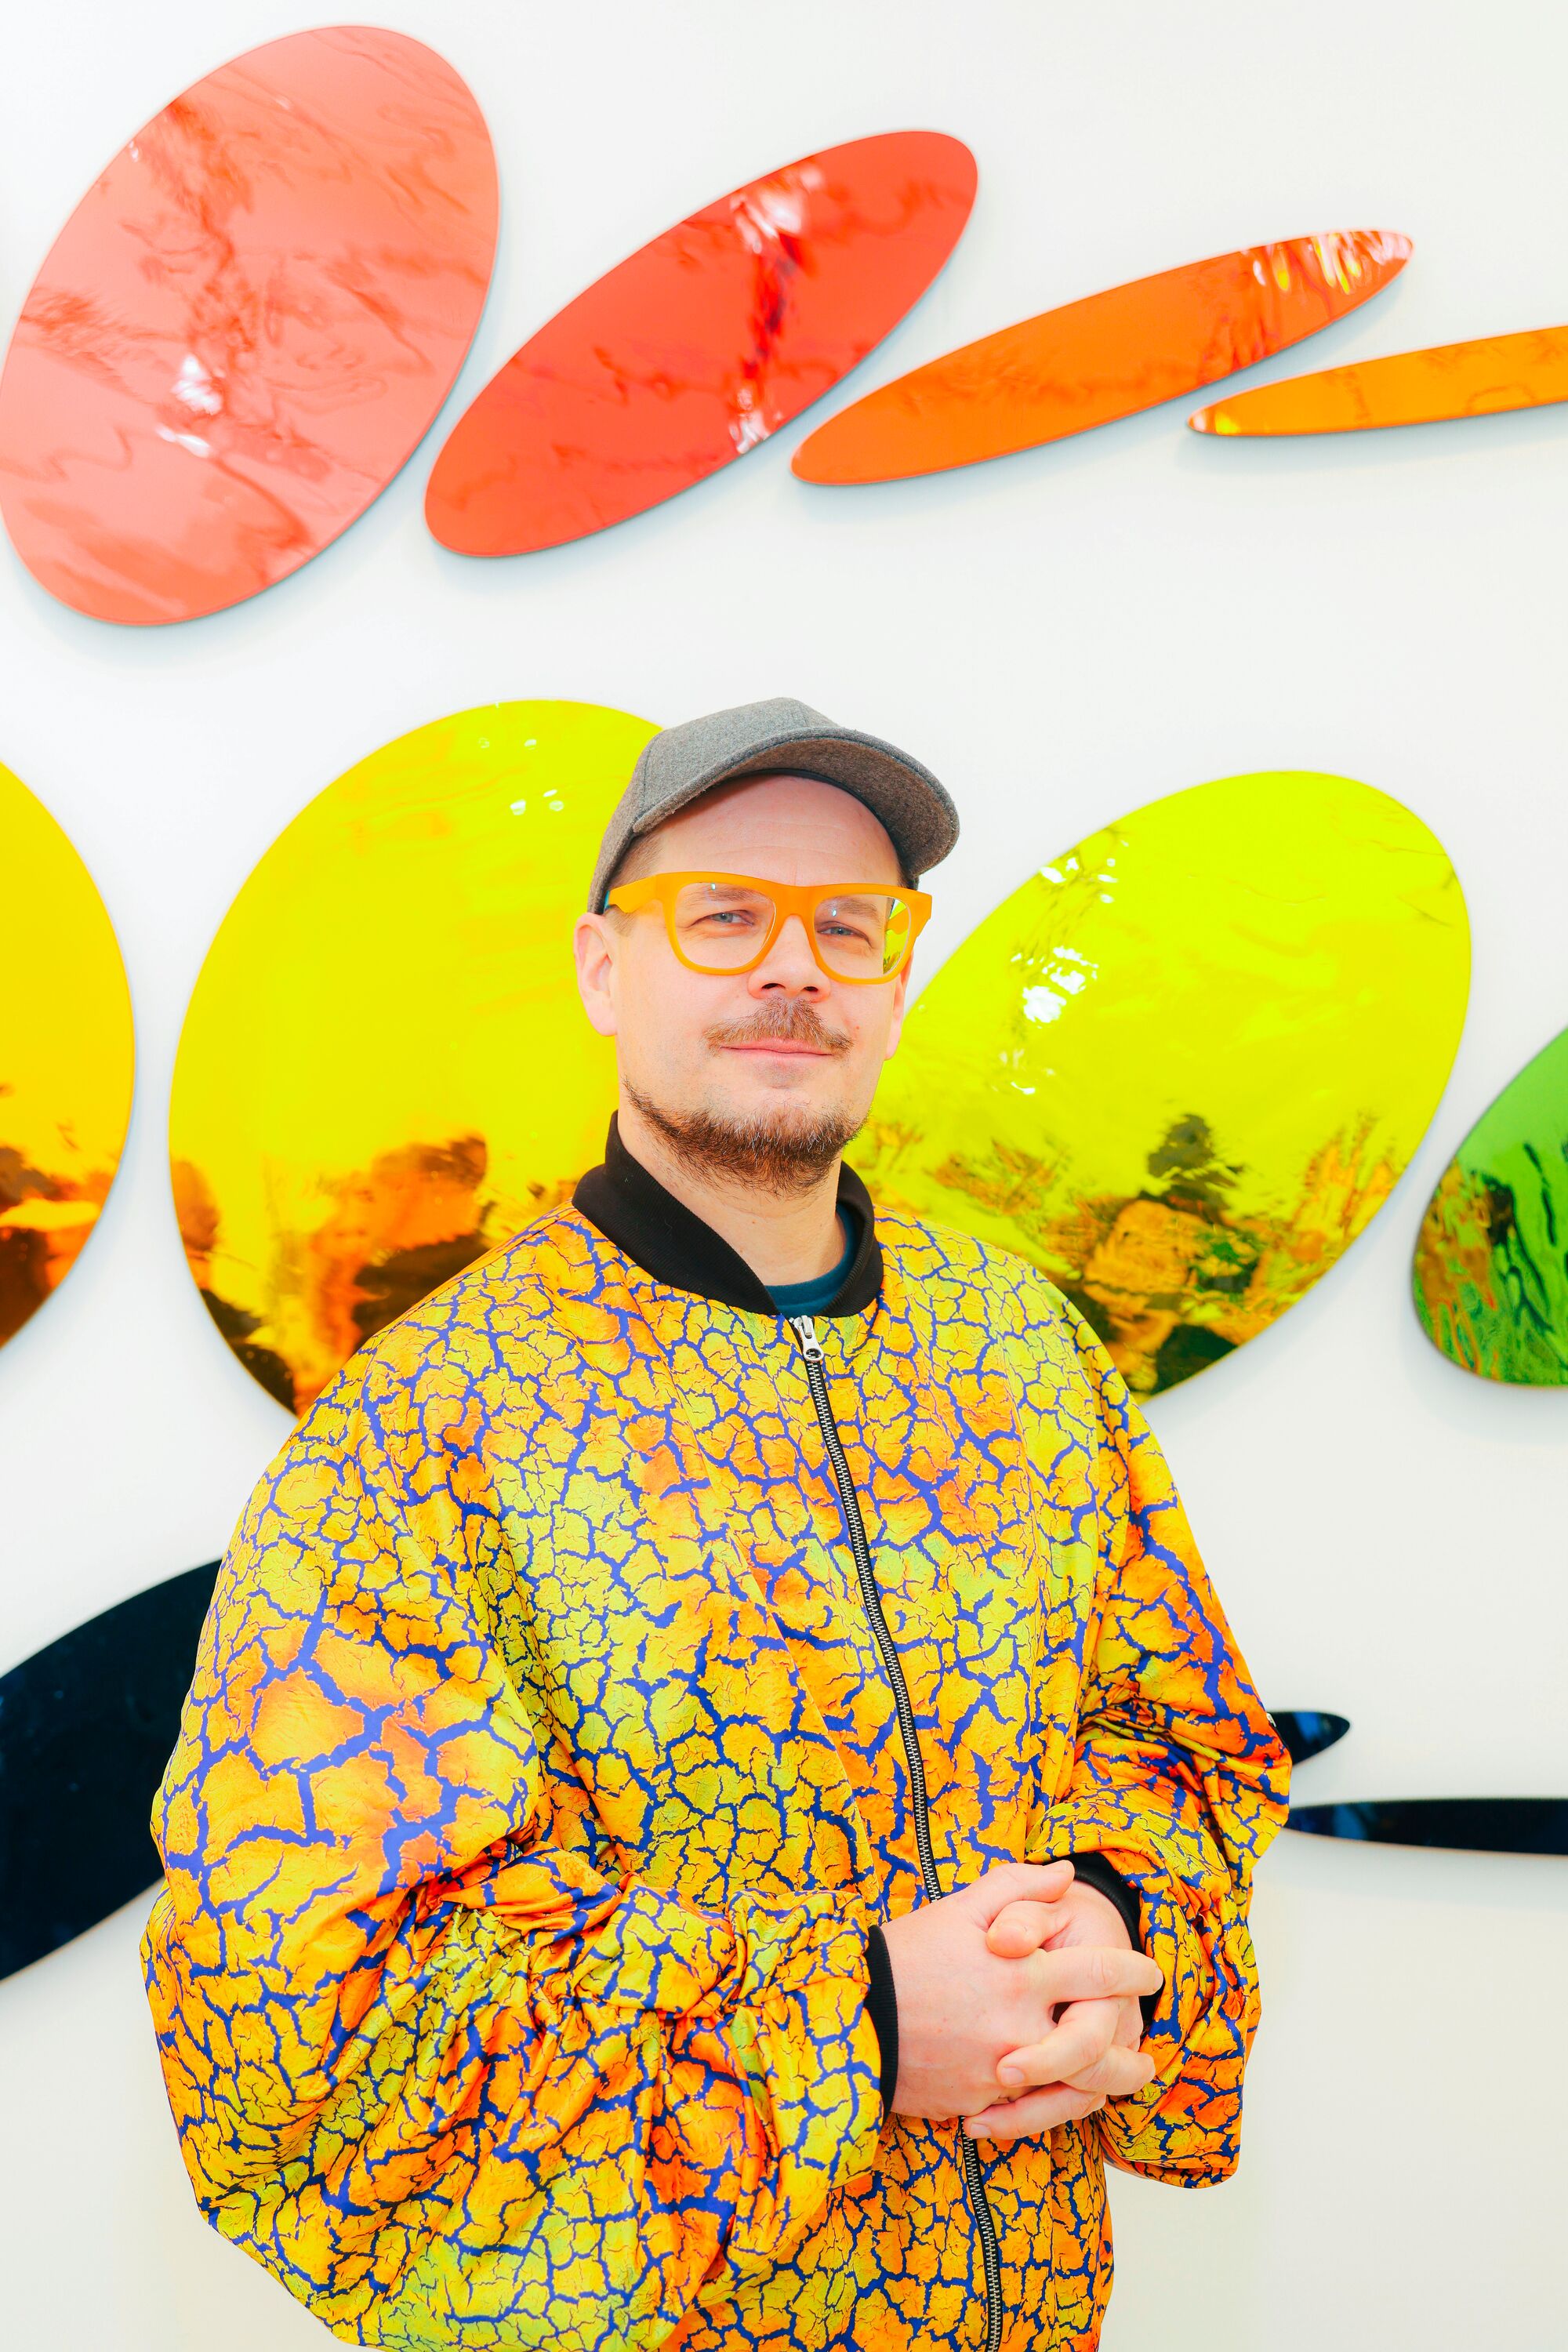 A person in a colorful yellow jacket poses in front a work of art.